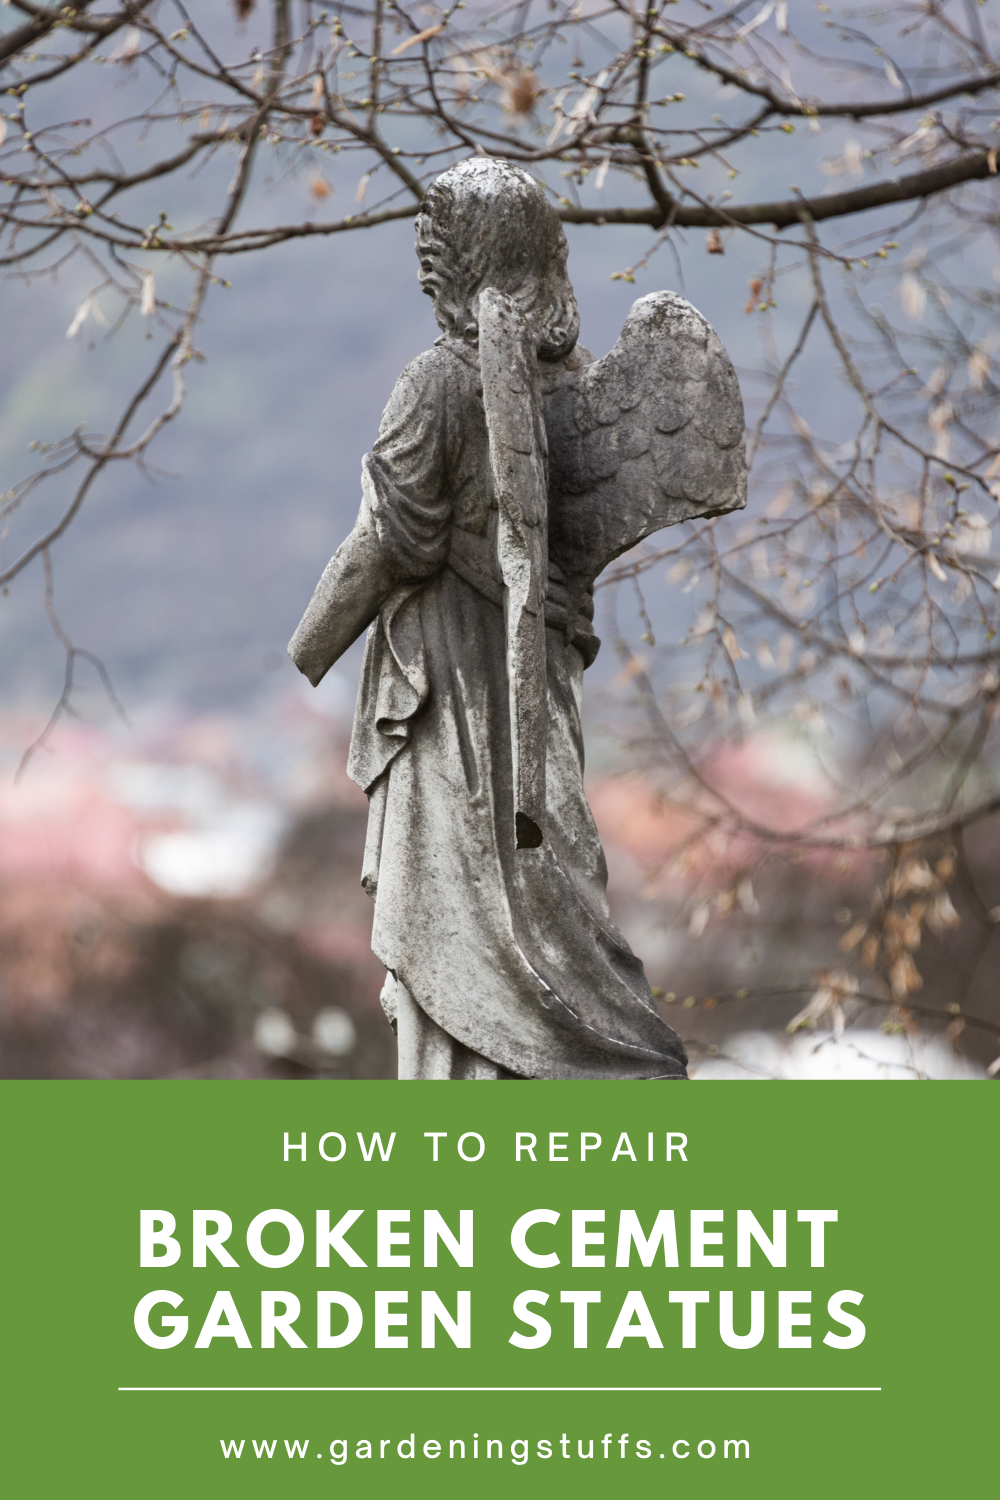 Do you know that you can repair your cement garden statues and this saves you from purchasing a new one? Read on our guide on how to repair broken cement garden gtatues by following the step-by-step guide.